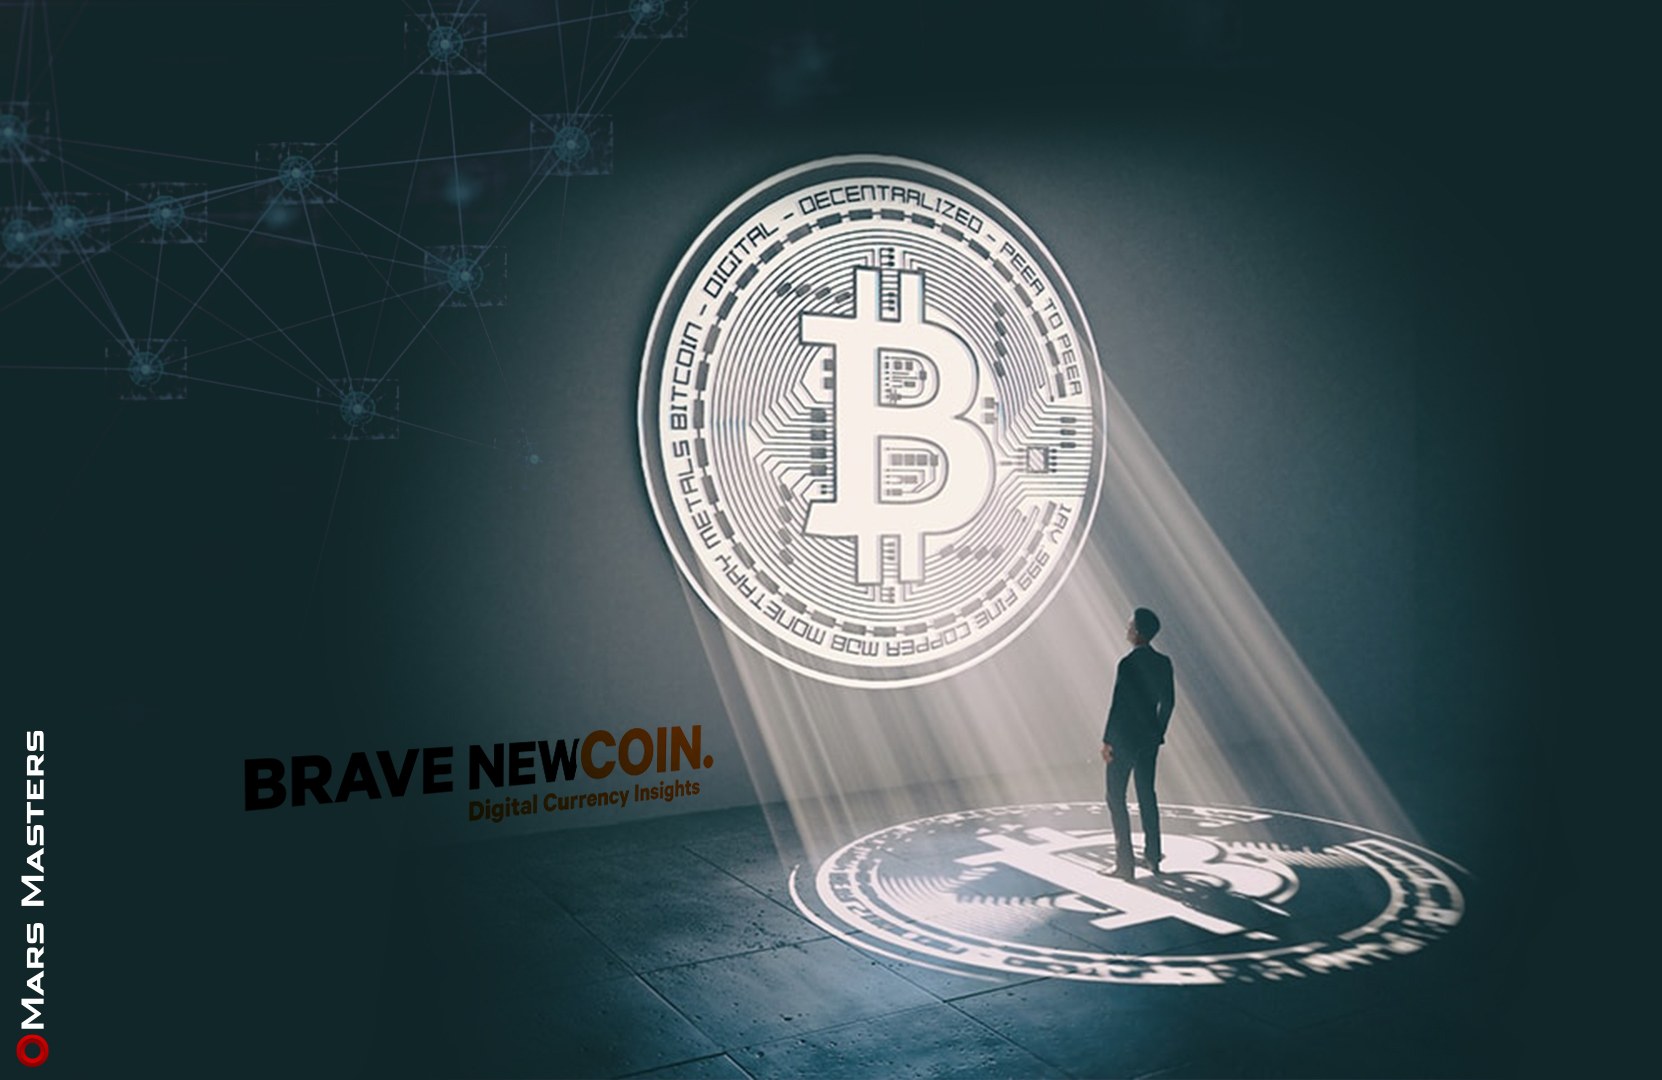 rave New Coin partnership will help Nevada crypto users reach new 'high'